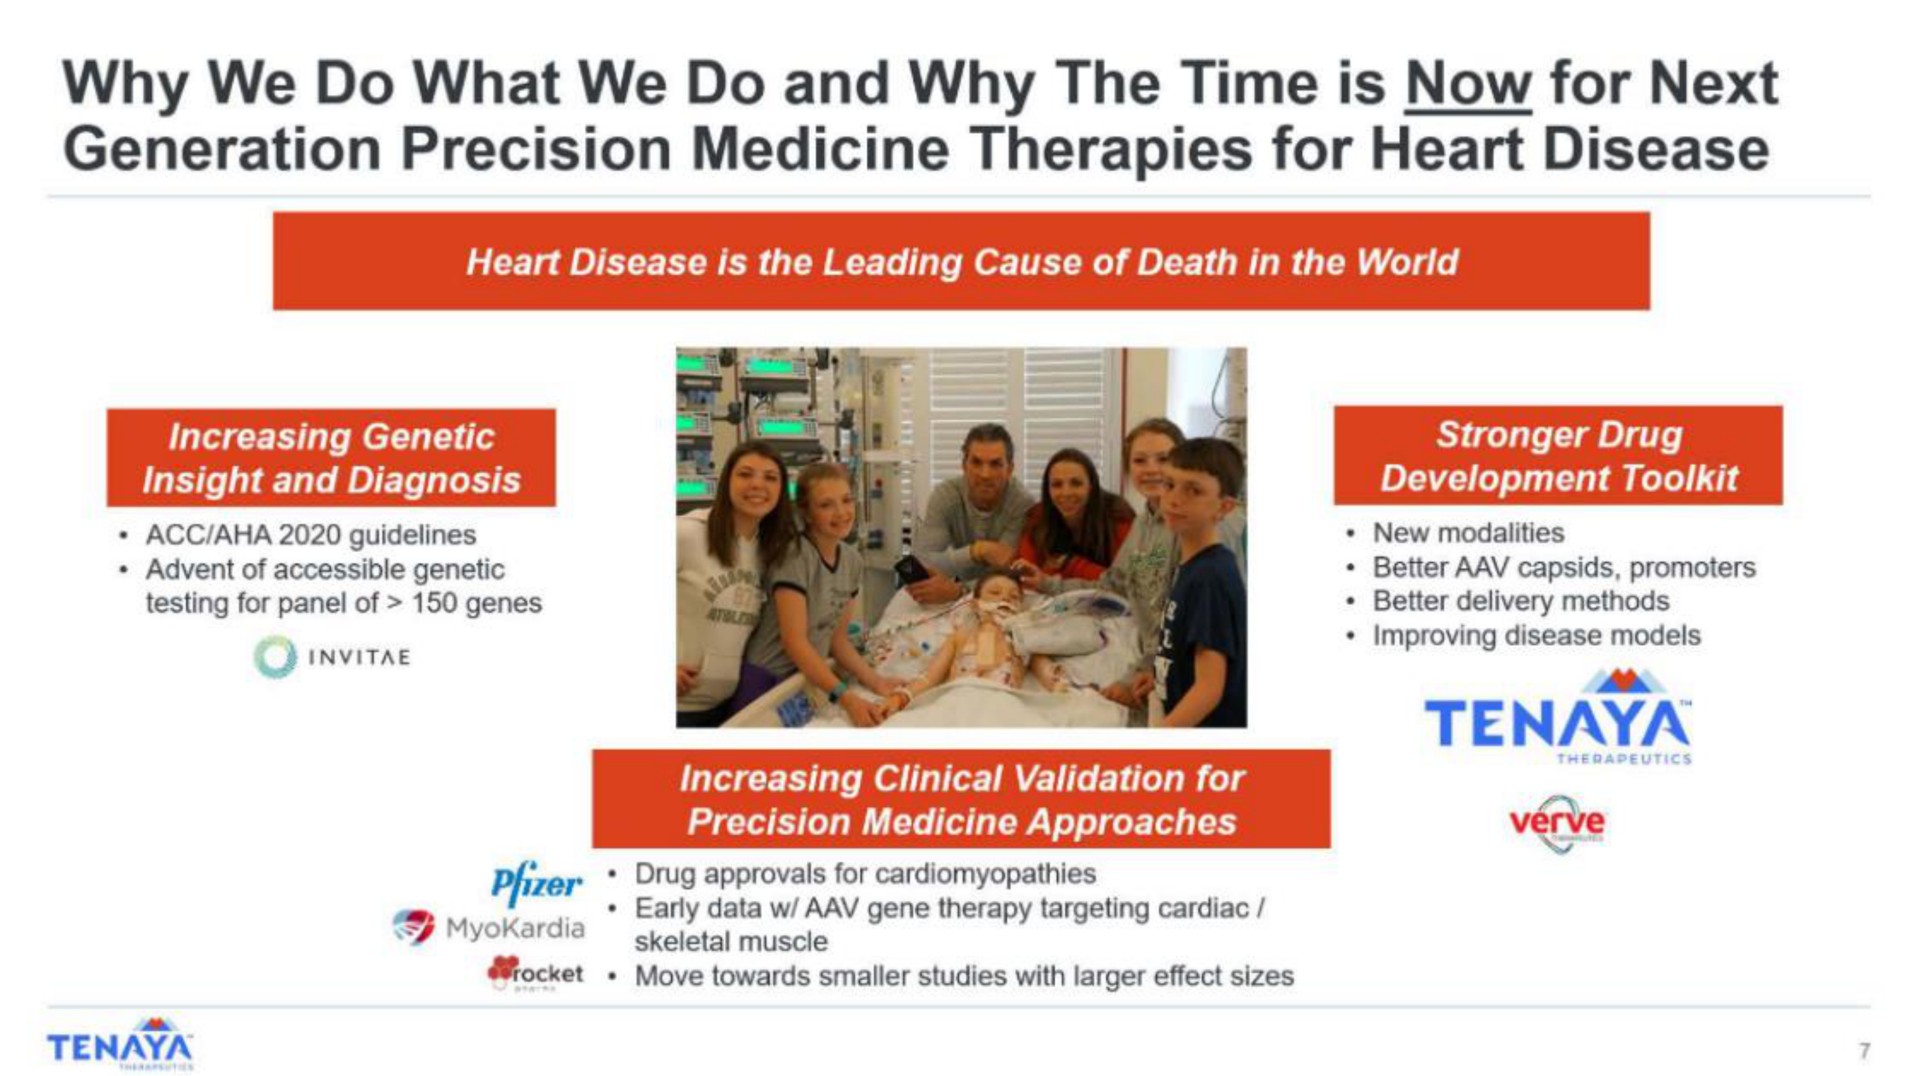 why we do what we do and why the time is now for next generation precision medicine therapies for heart disease | Tenaya Therapeutics